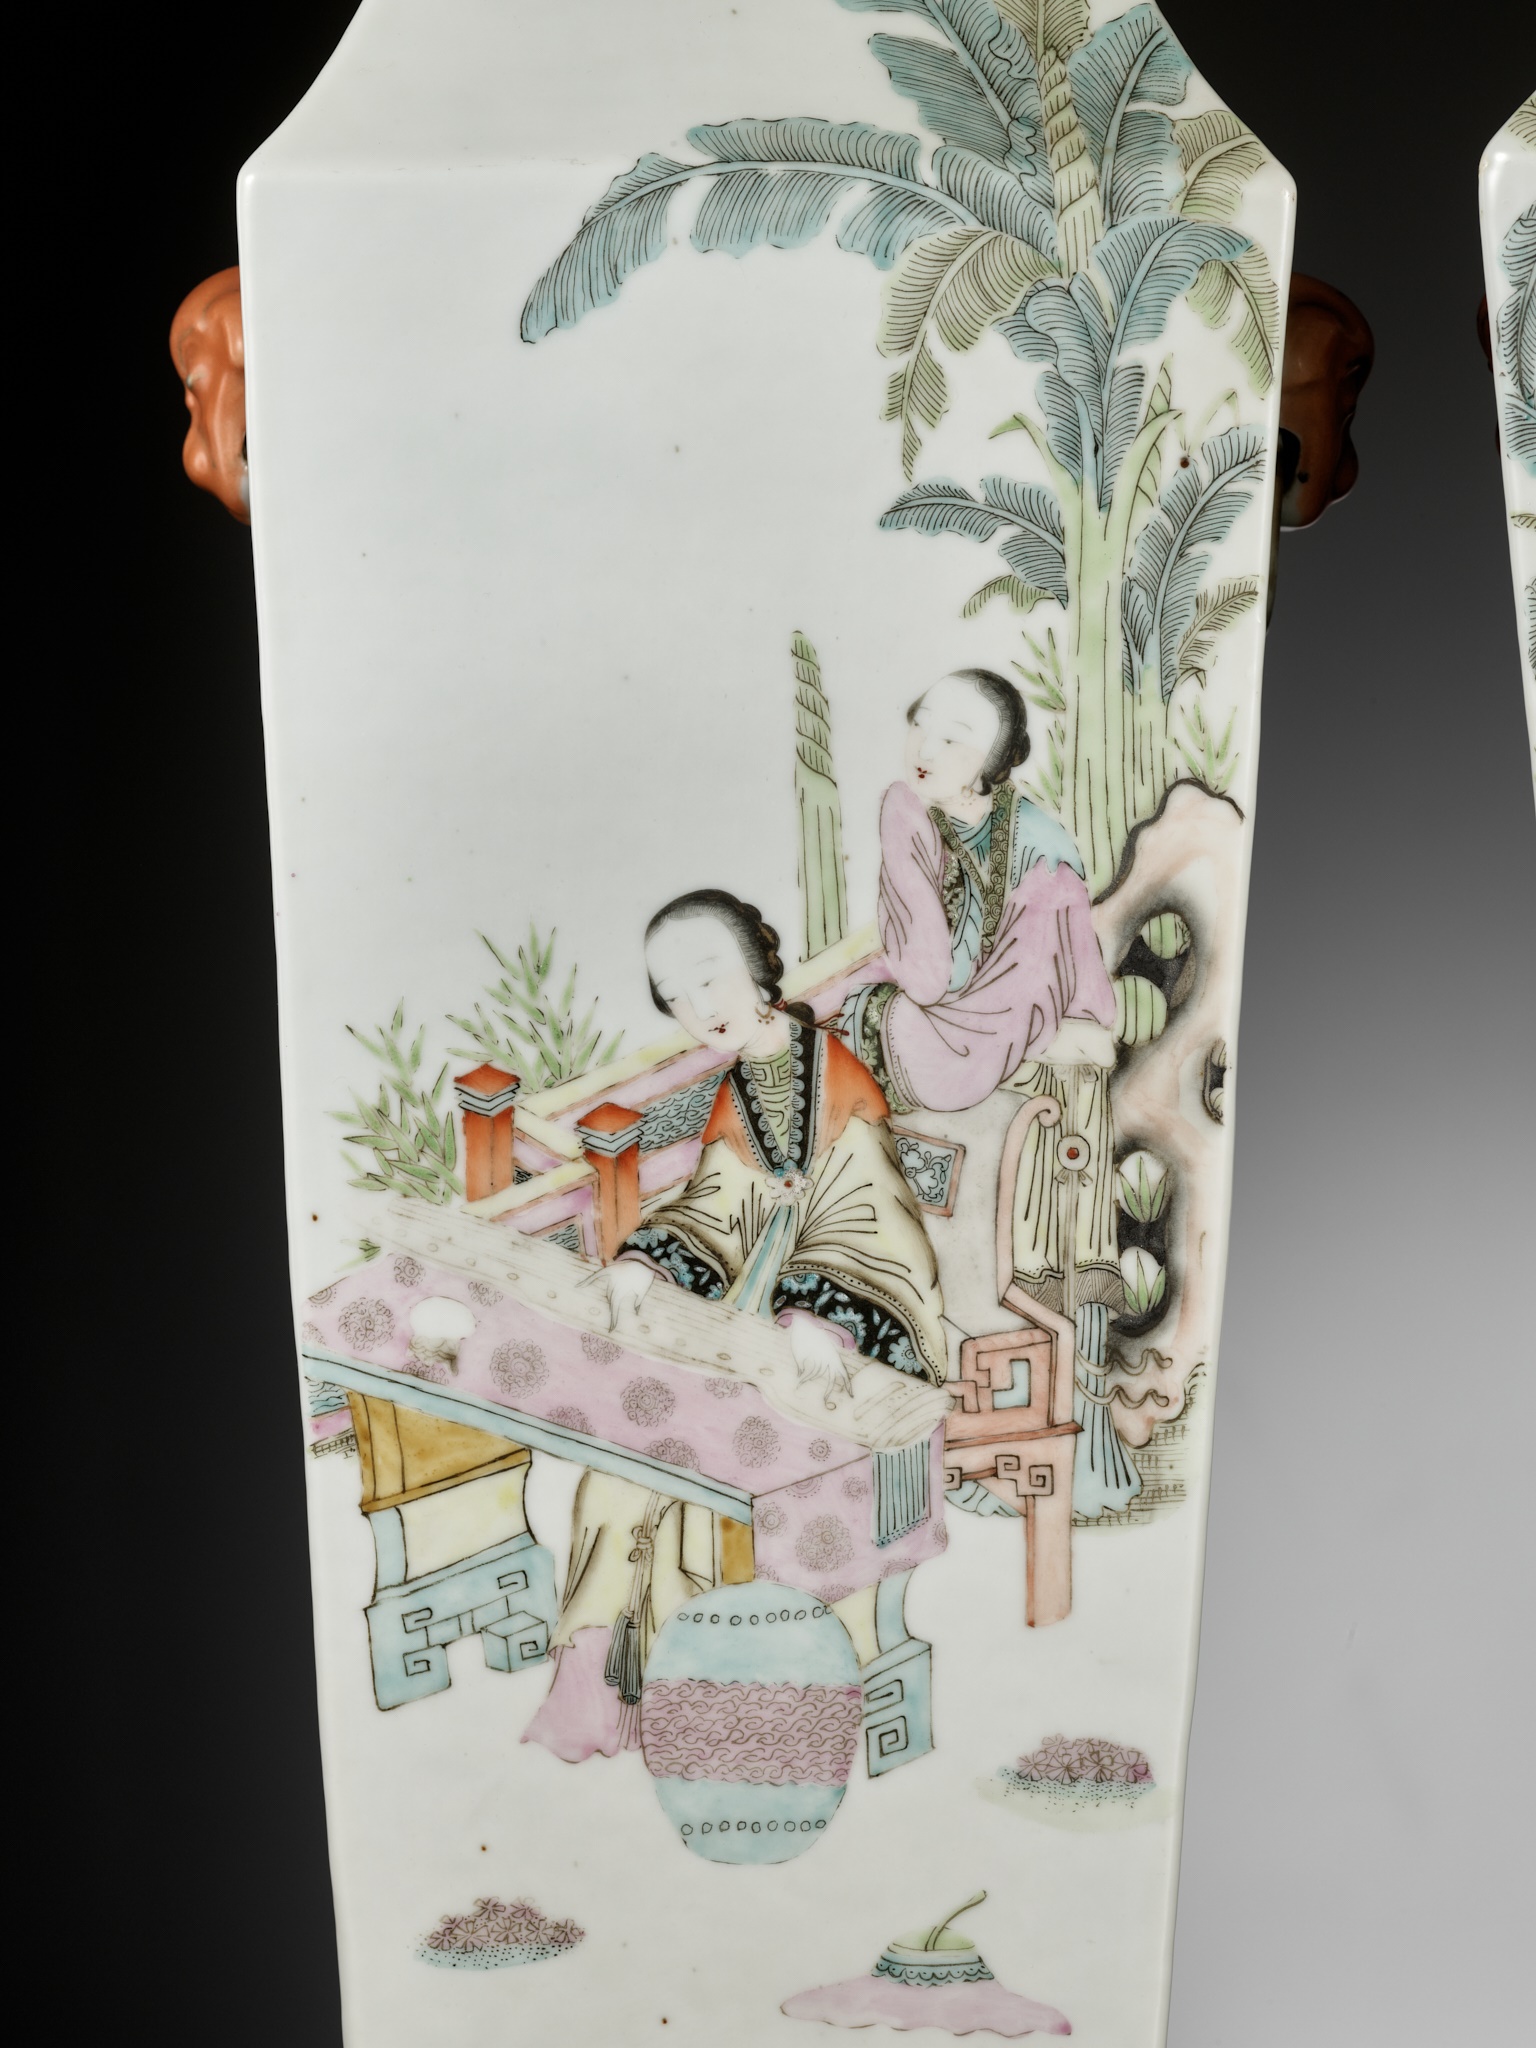 A PAIR OF LARGE QIANJIANG CAI VASES, BY FANG JIAZHEN, CHINA, DATED 1895 - Image 8 of 17